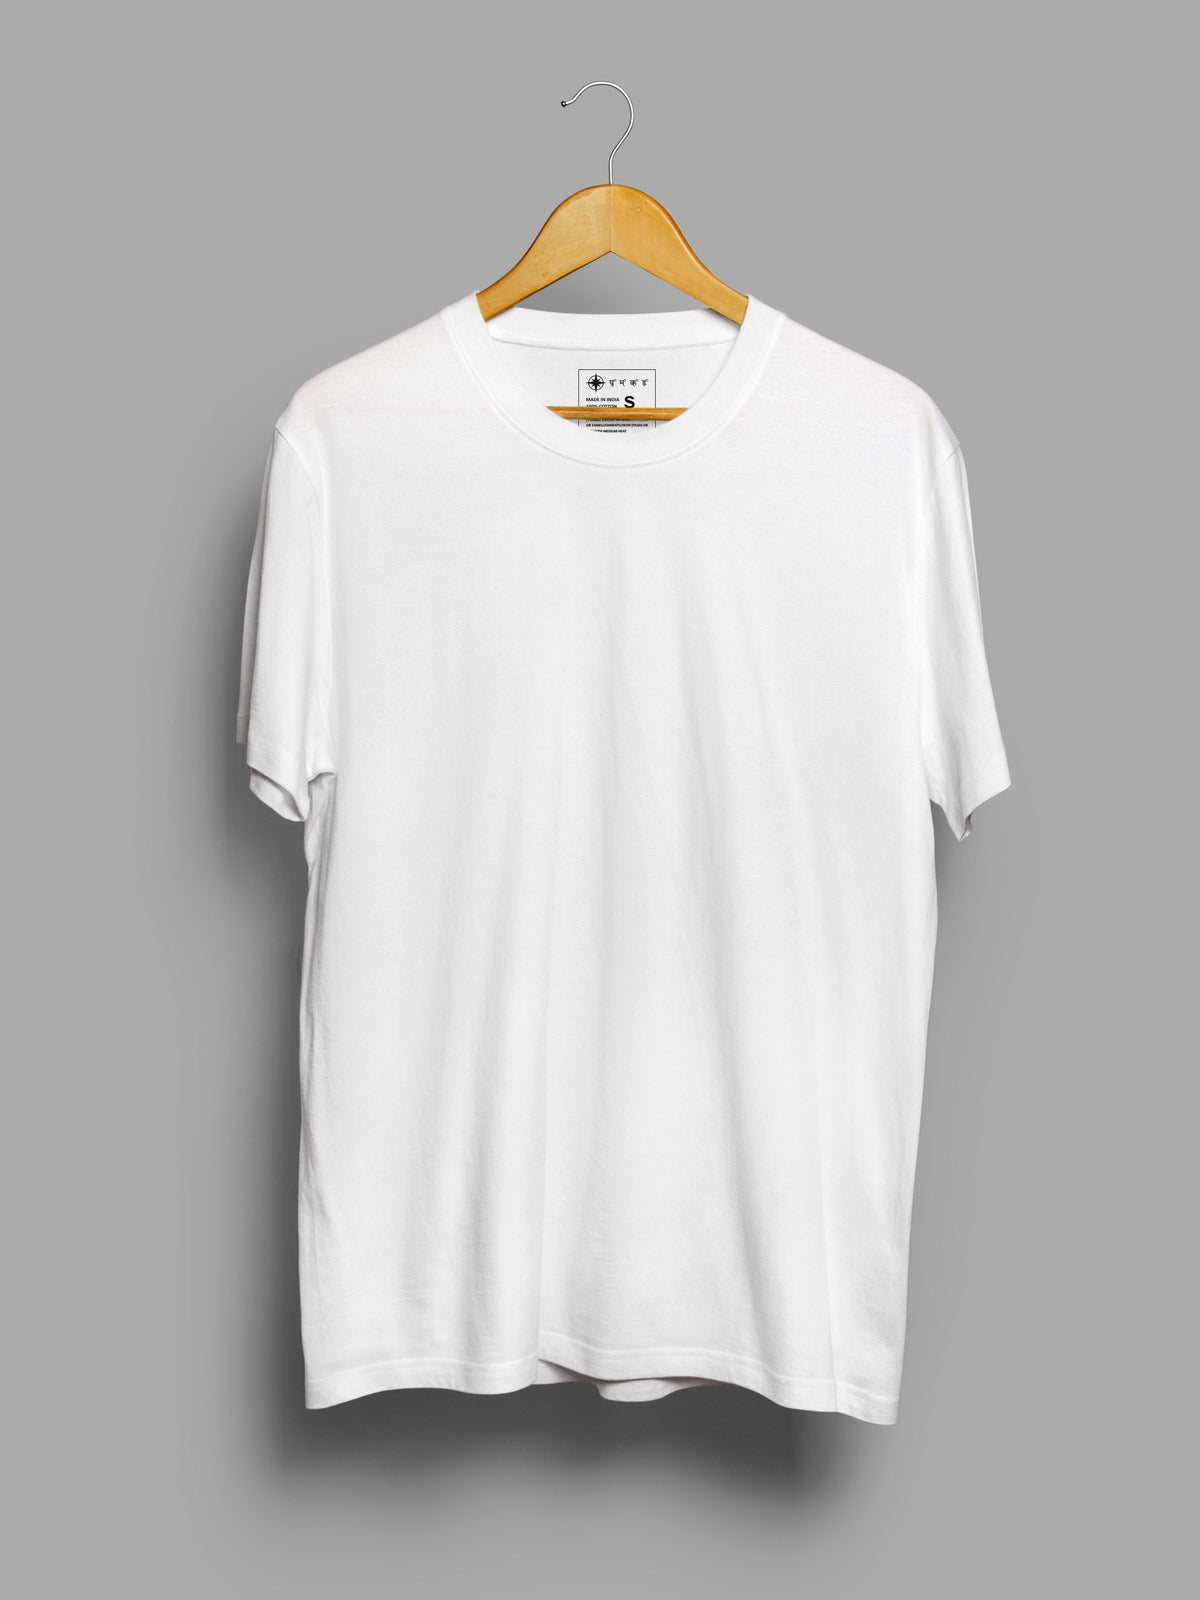 Pack of 2 | Coffee Brown & White Unisex Plain T shirt